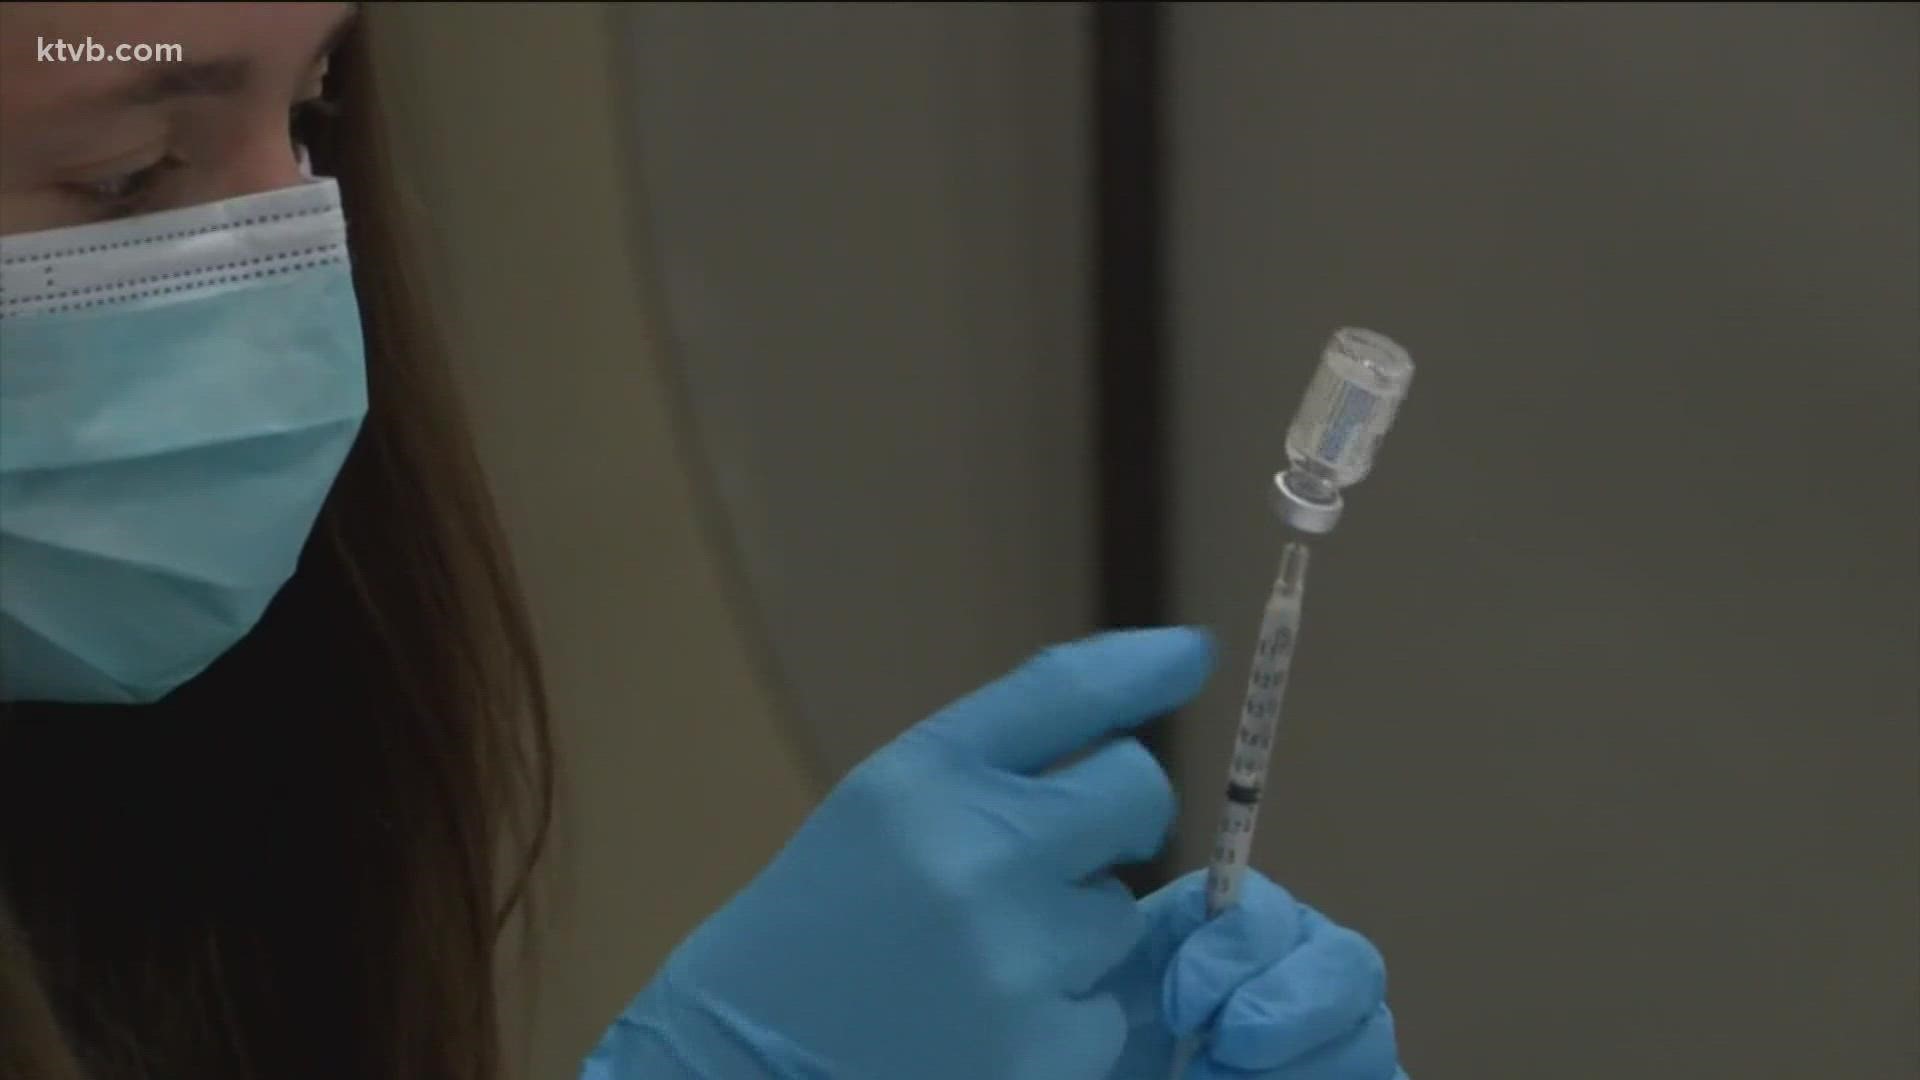 KTVB reached out to some school districts after the CDC gave vaccine approval for kids ages 5-11.